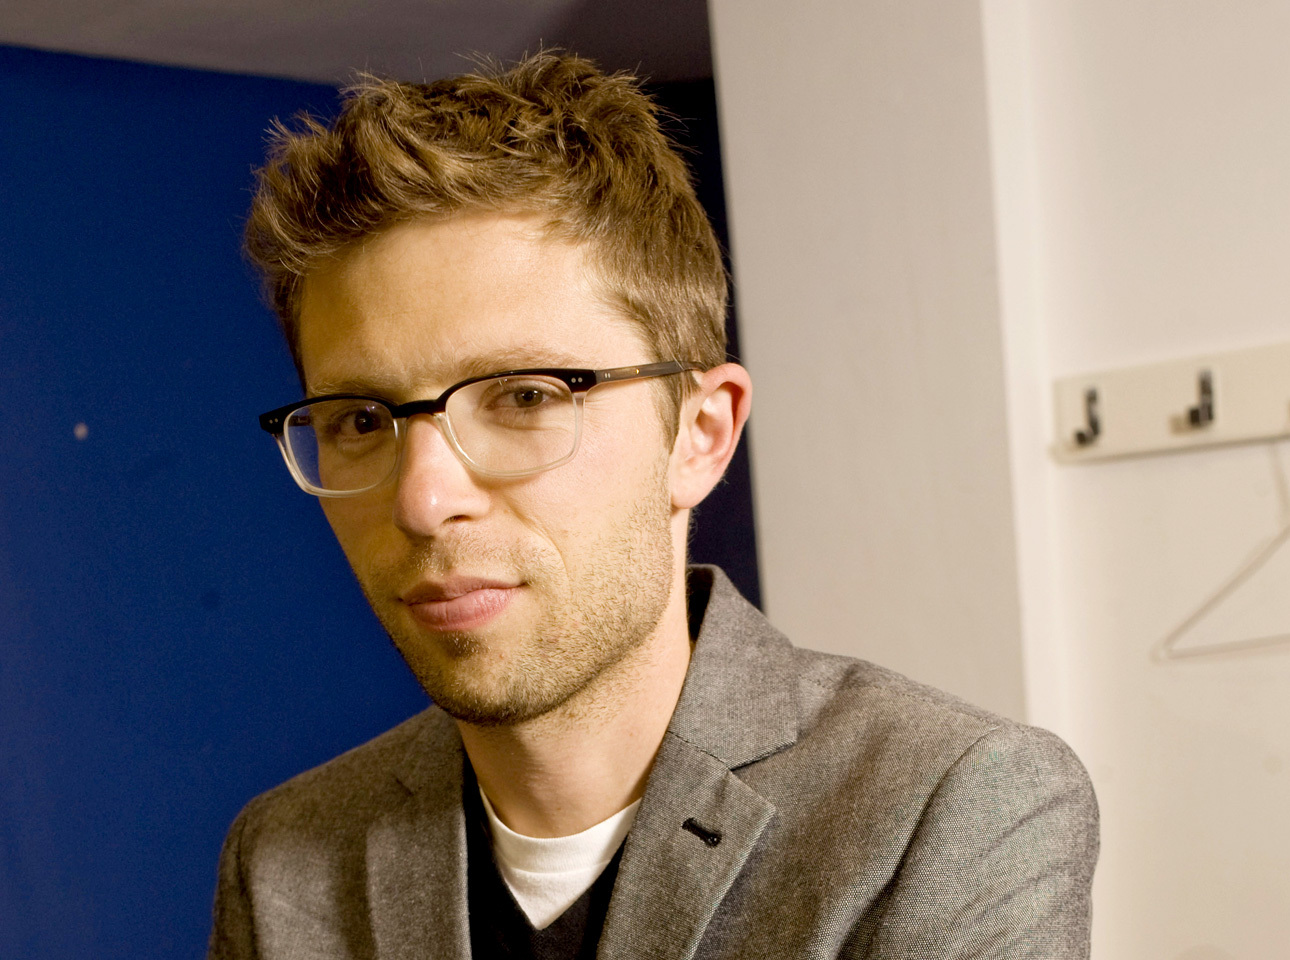 Jonah Lehrer admits to fake Bob Dylan quotes, resigns from New Yorker.